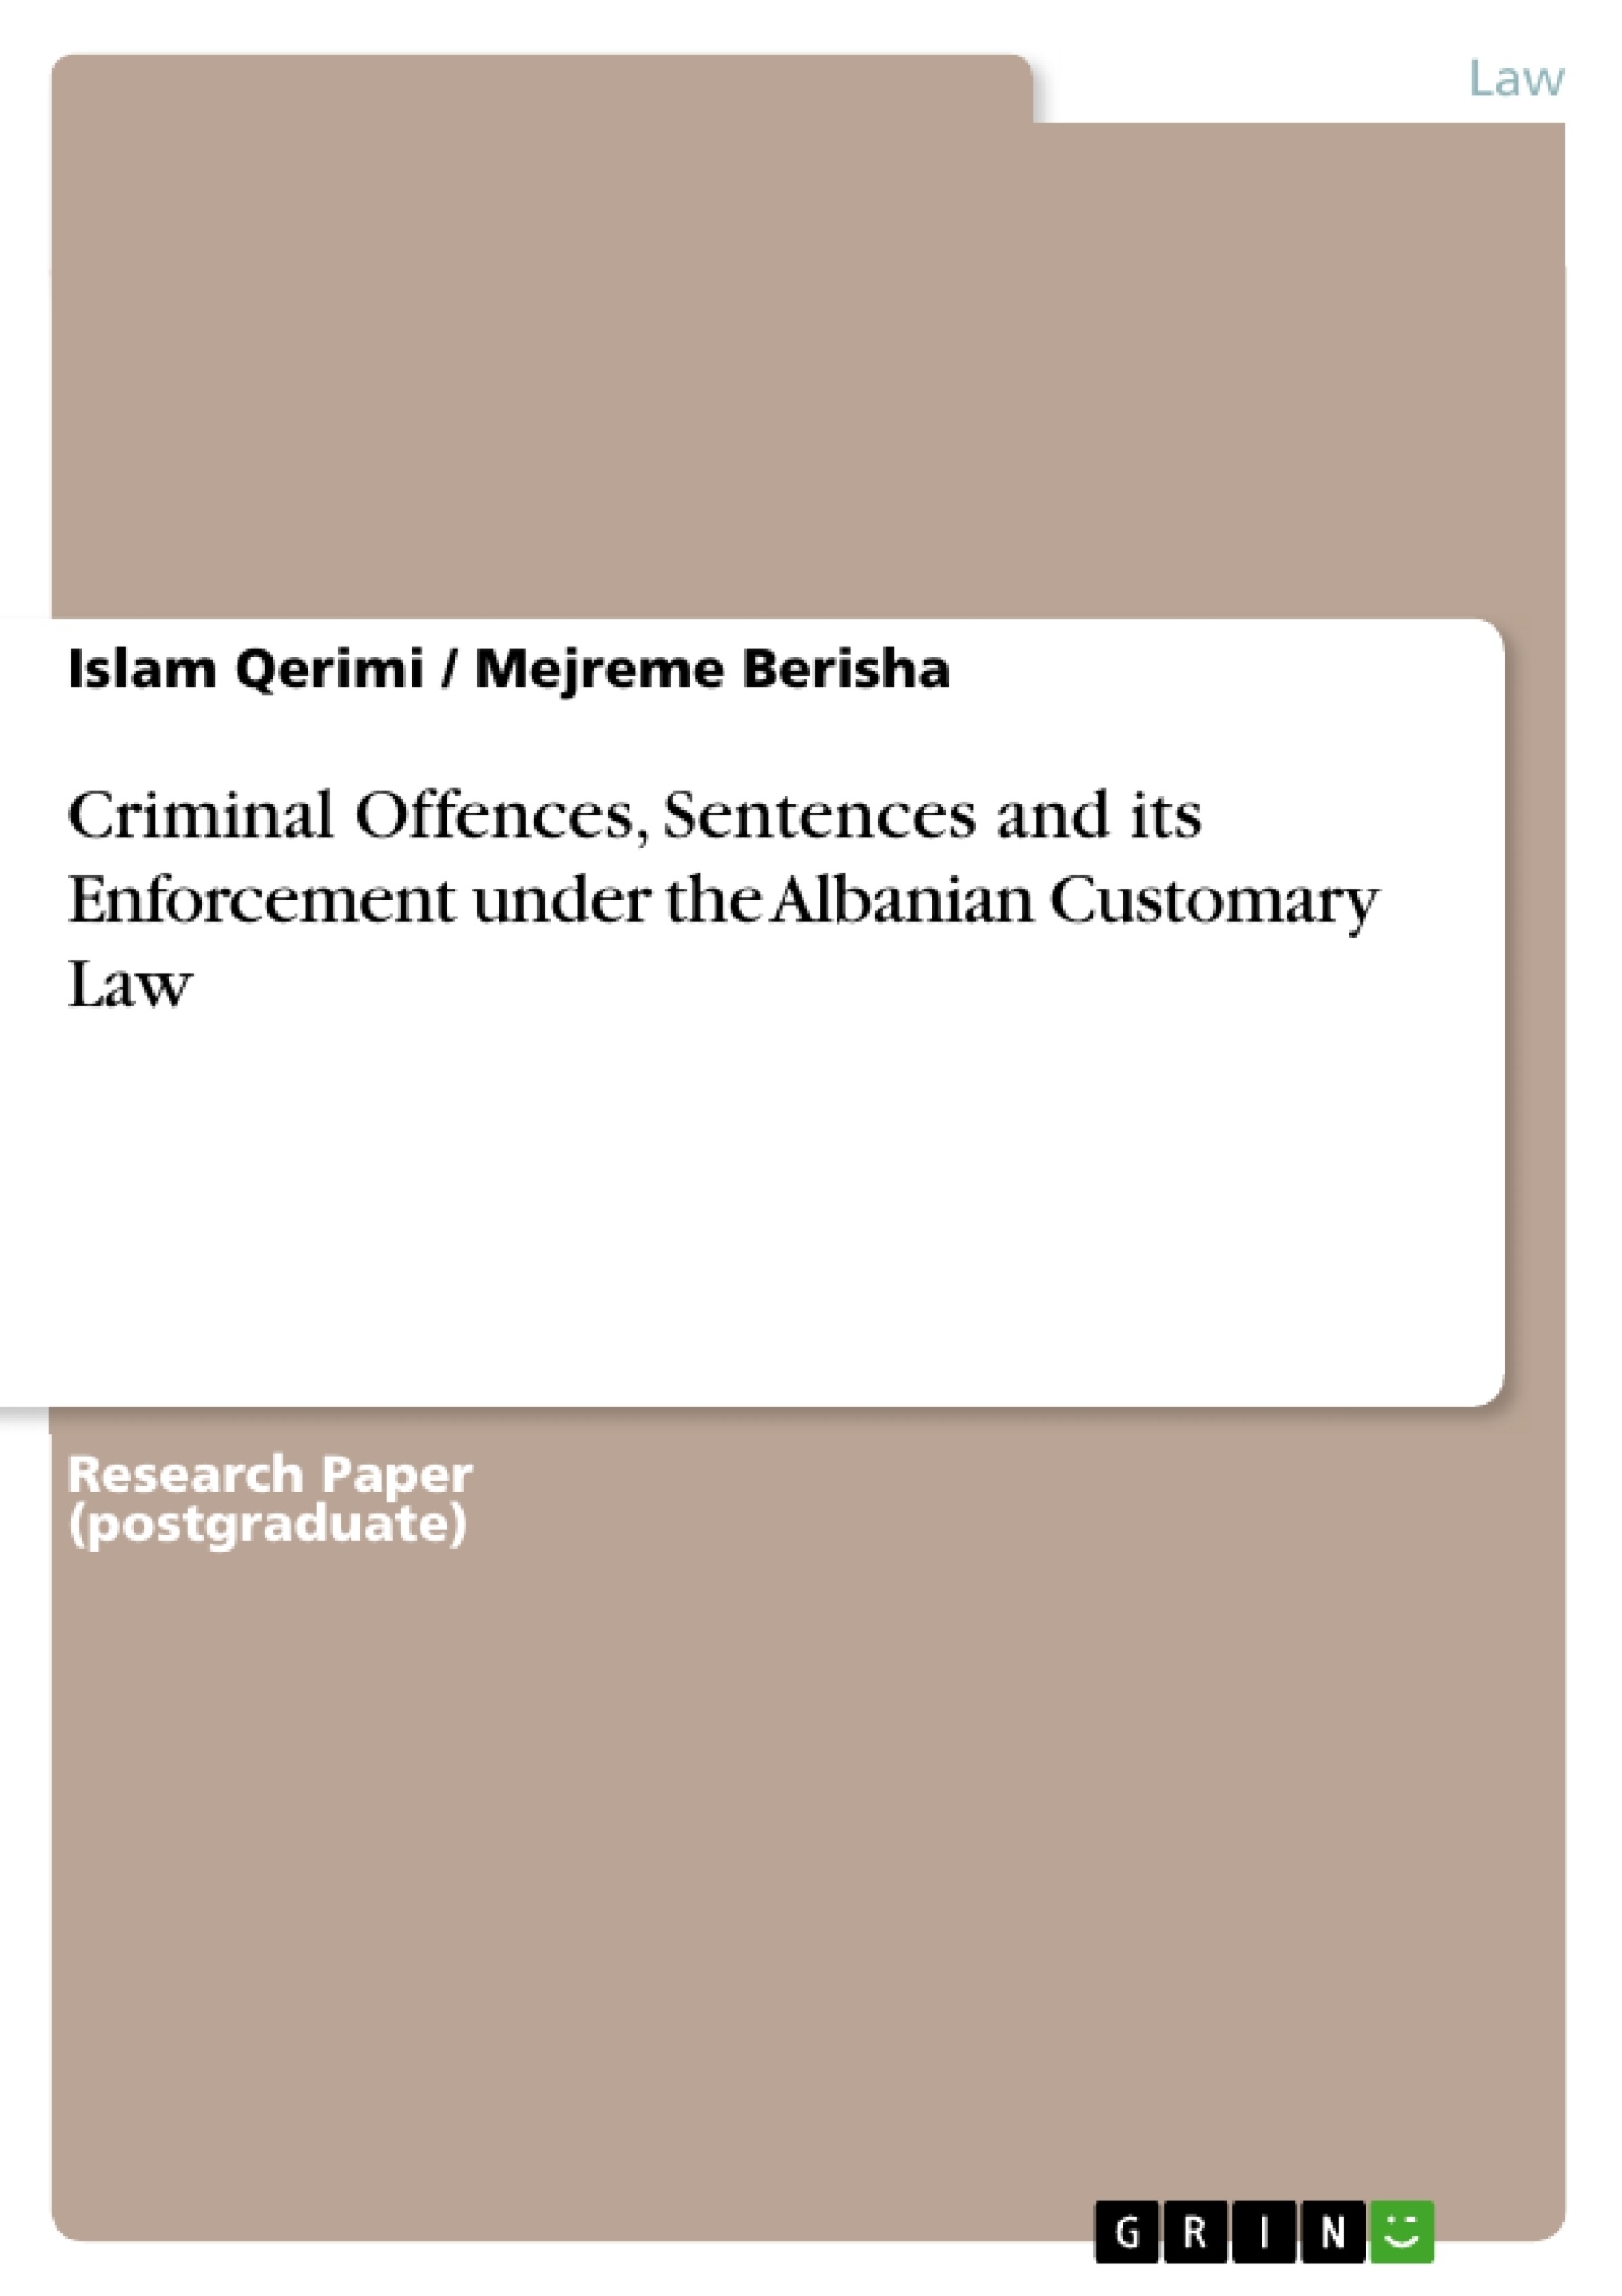 Title: Criminal Offences, Sentences and its Enforcement under the Albanian Customary Law